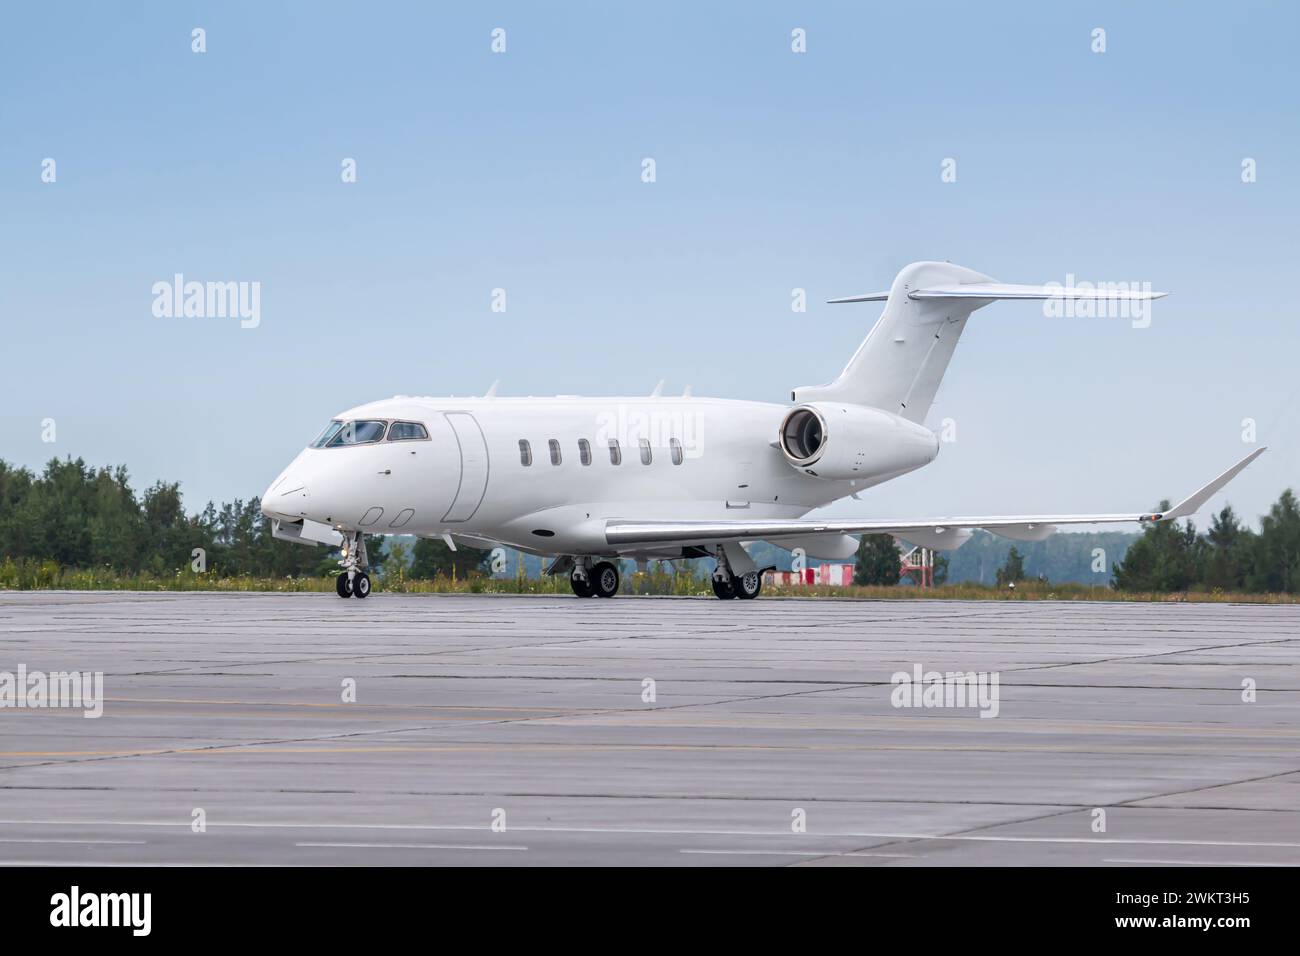 White luxury business jet taxiing on airport taxiway Stock Photo